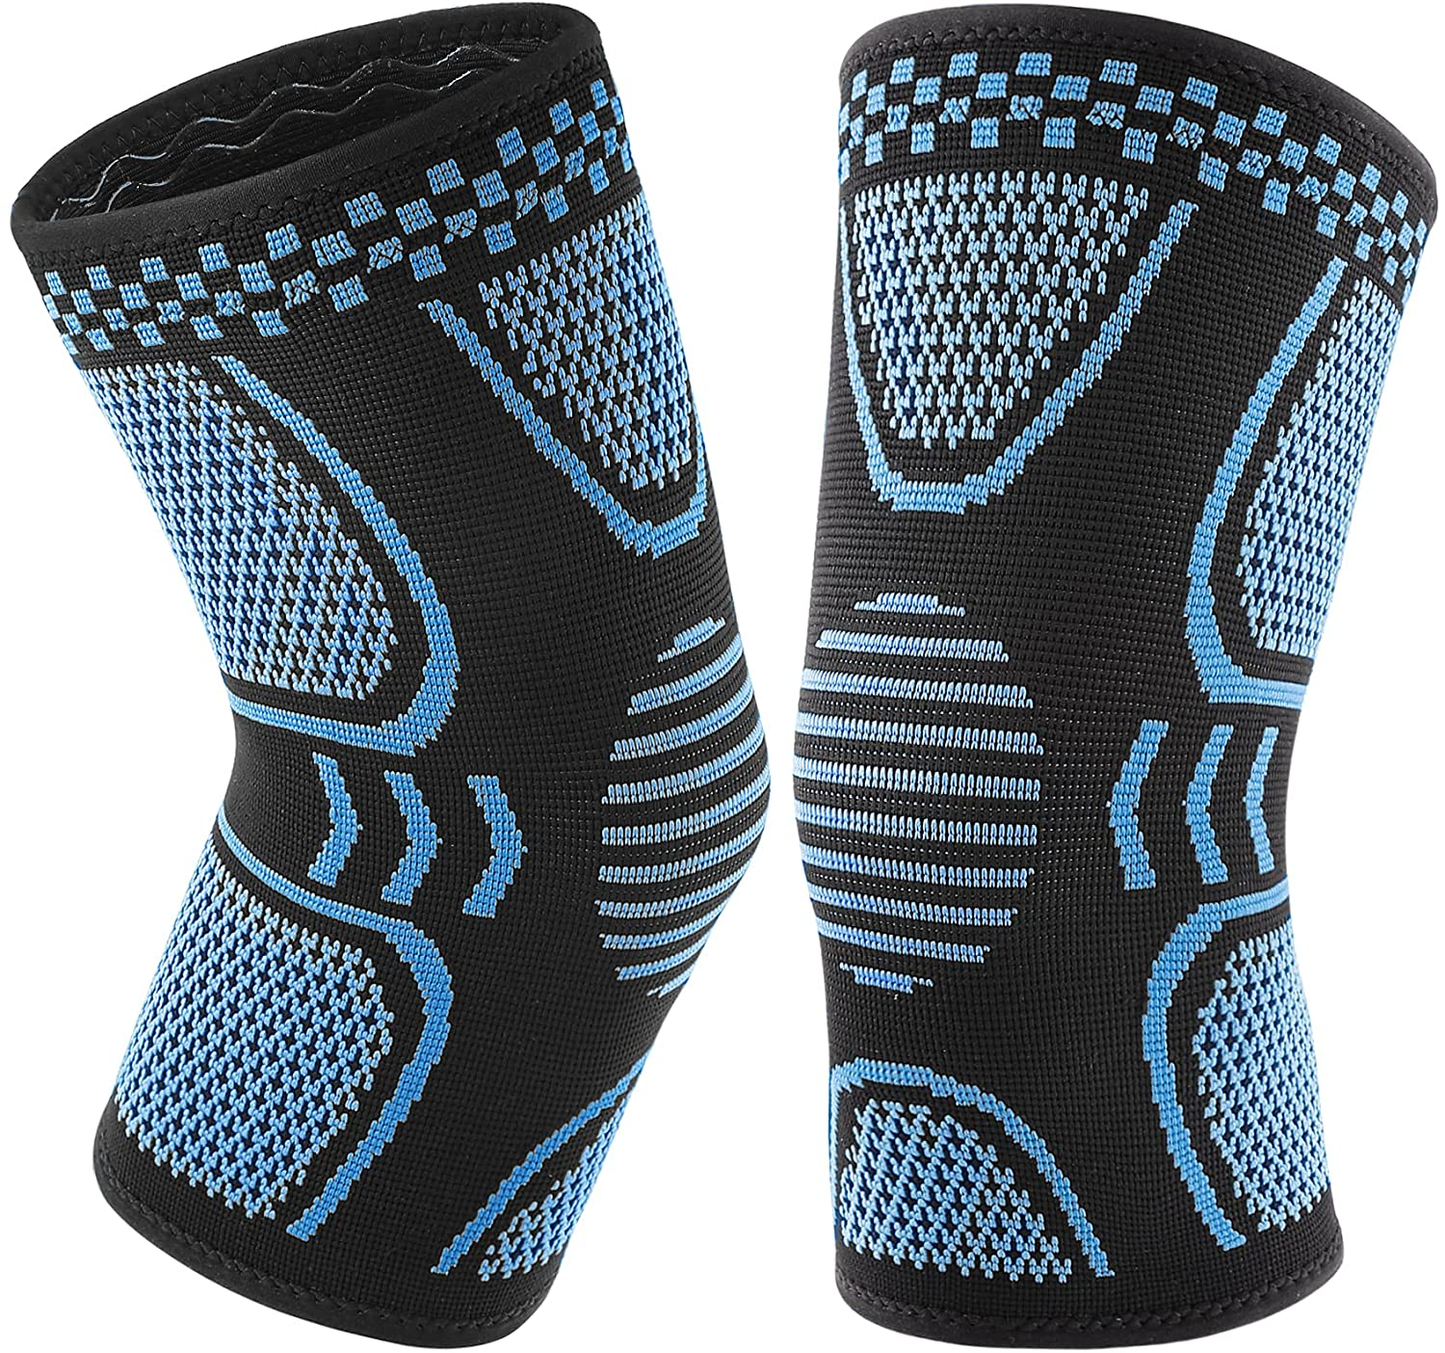 1 Pair Knee Brace Knee Compression Sleeve for Men & Women Knee Support Knee Pads for Meniscus Tear, ACL, Arthritis, Joint Pain Relief Working Out Sports